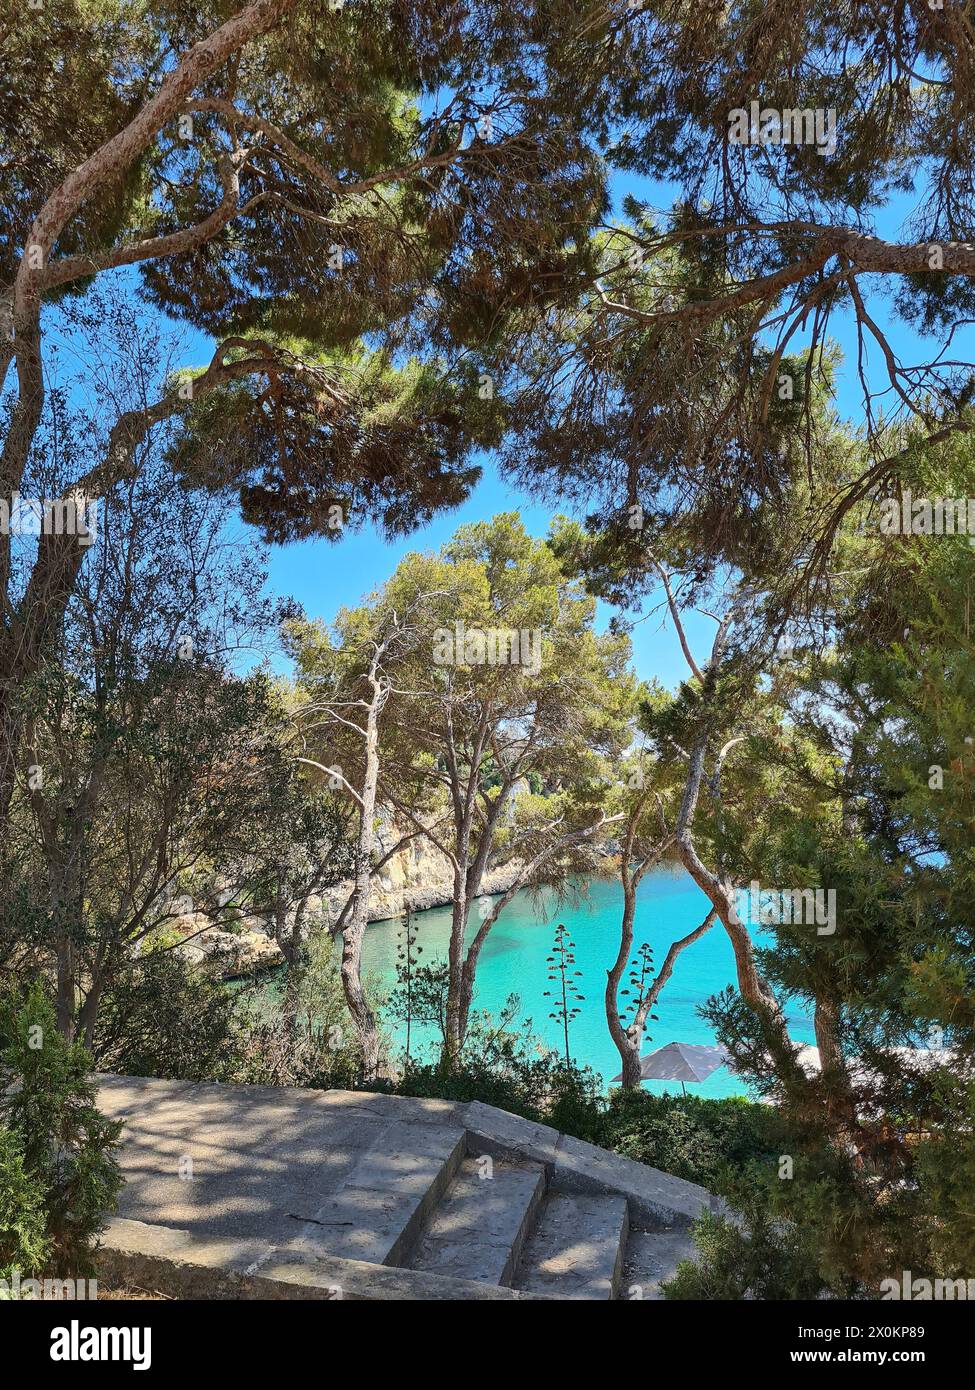 View of the public passage to the beach with pines and trees through which you can see the picturesque turquoise bay of Port Christo, Mallorca, Spain Stock Photo